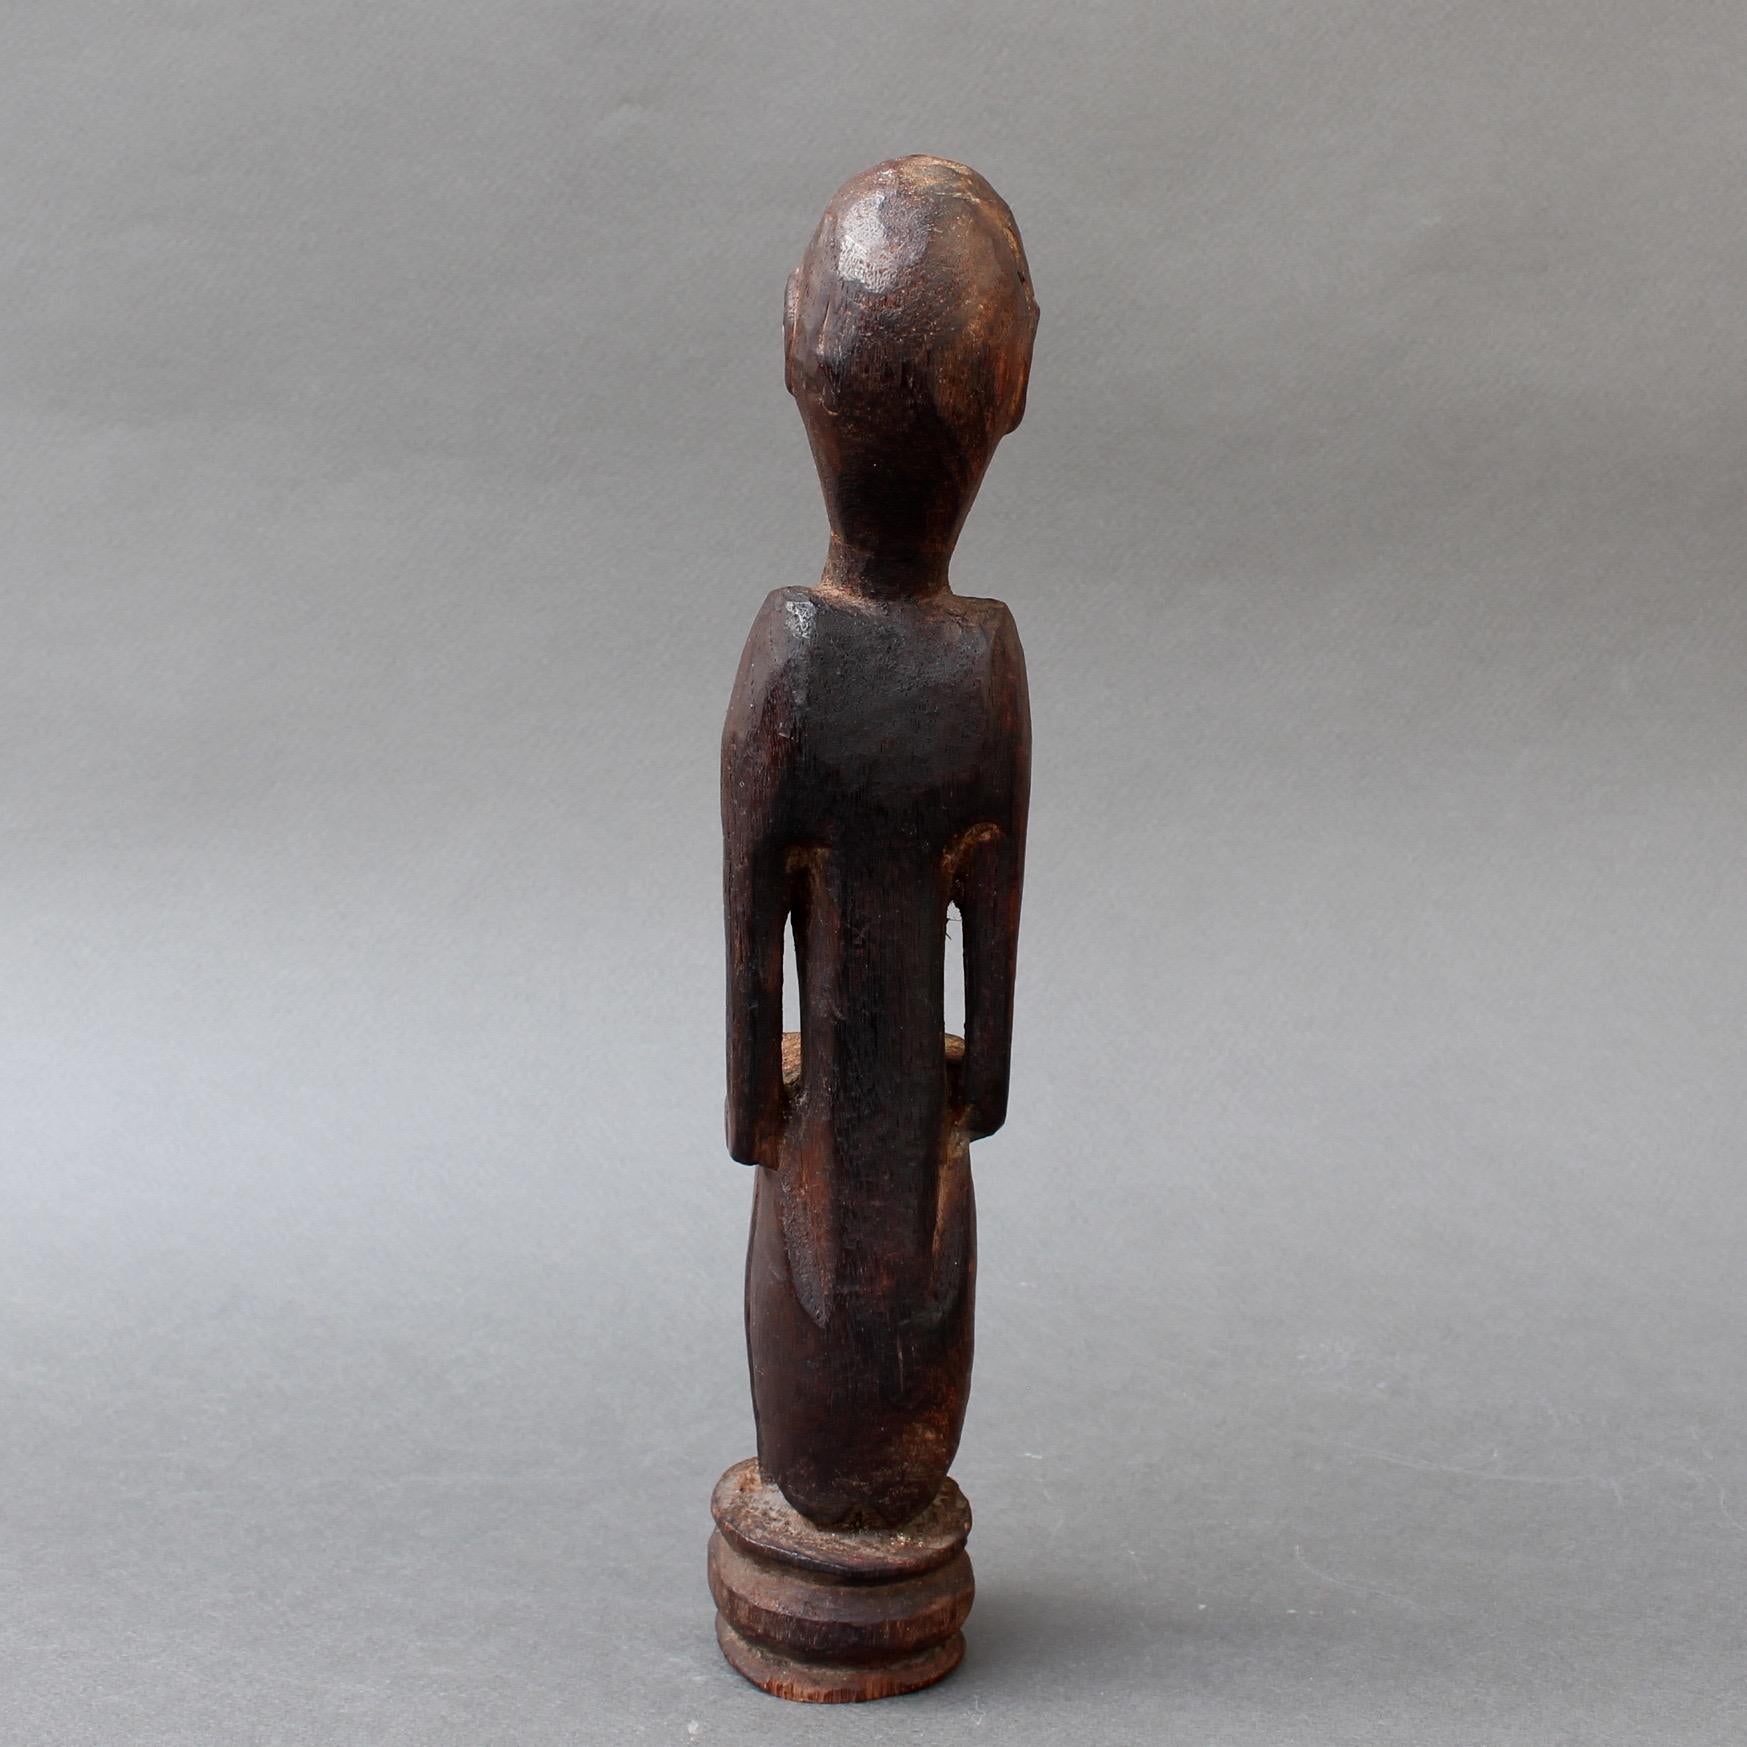 20th Century Wooden Sculpture or Carving of Sitting Figure from Sumba Island, Indonesia